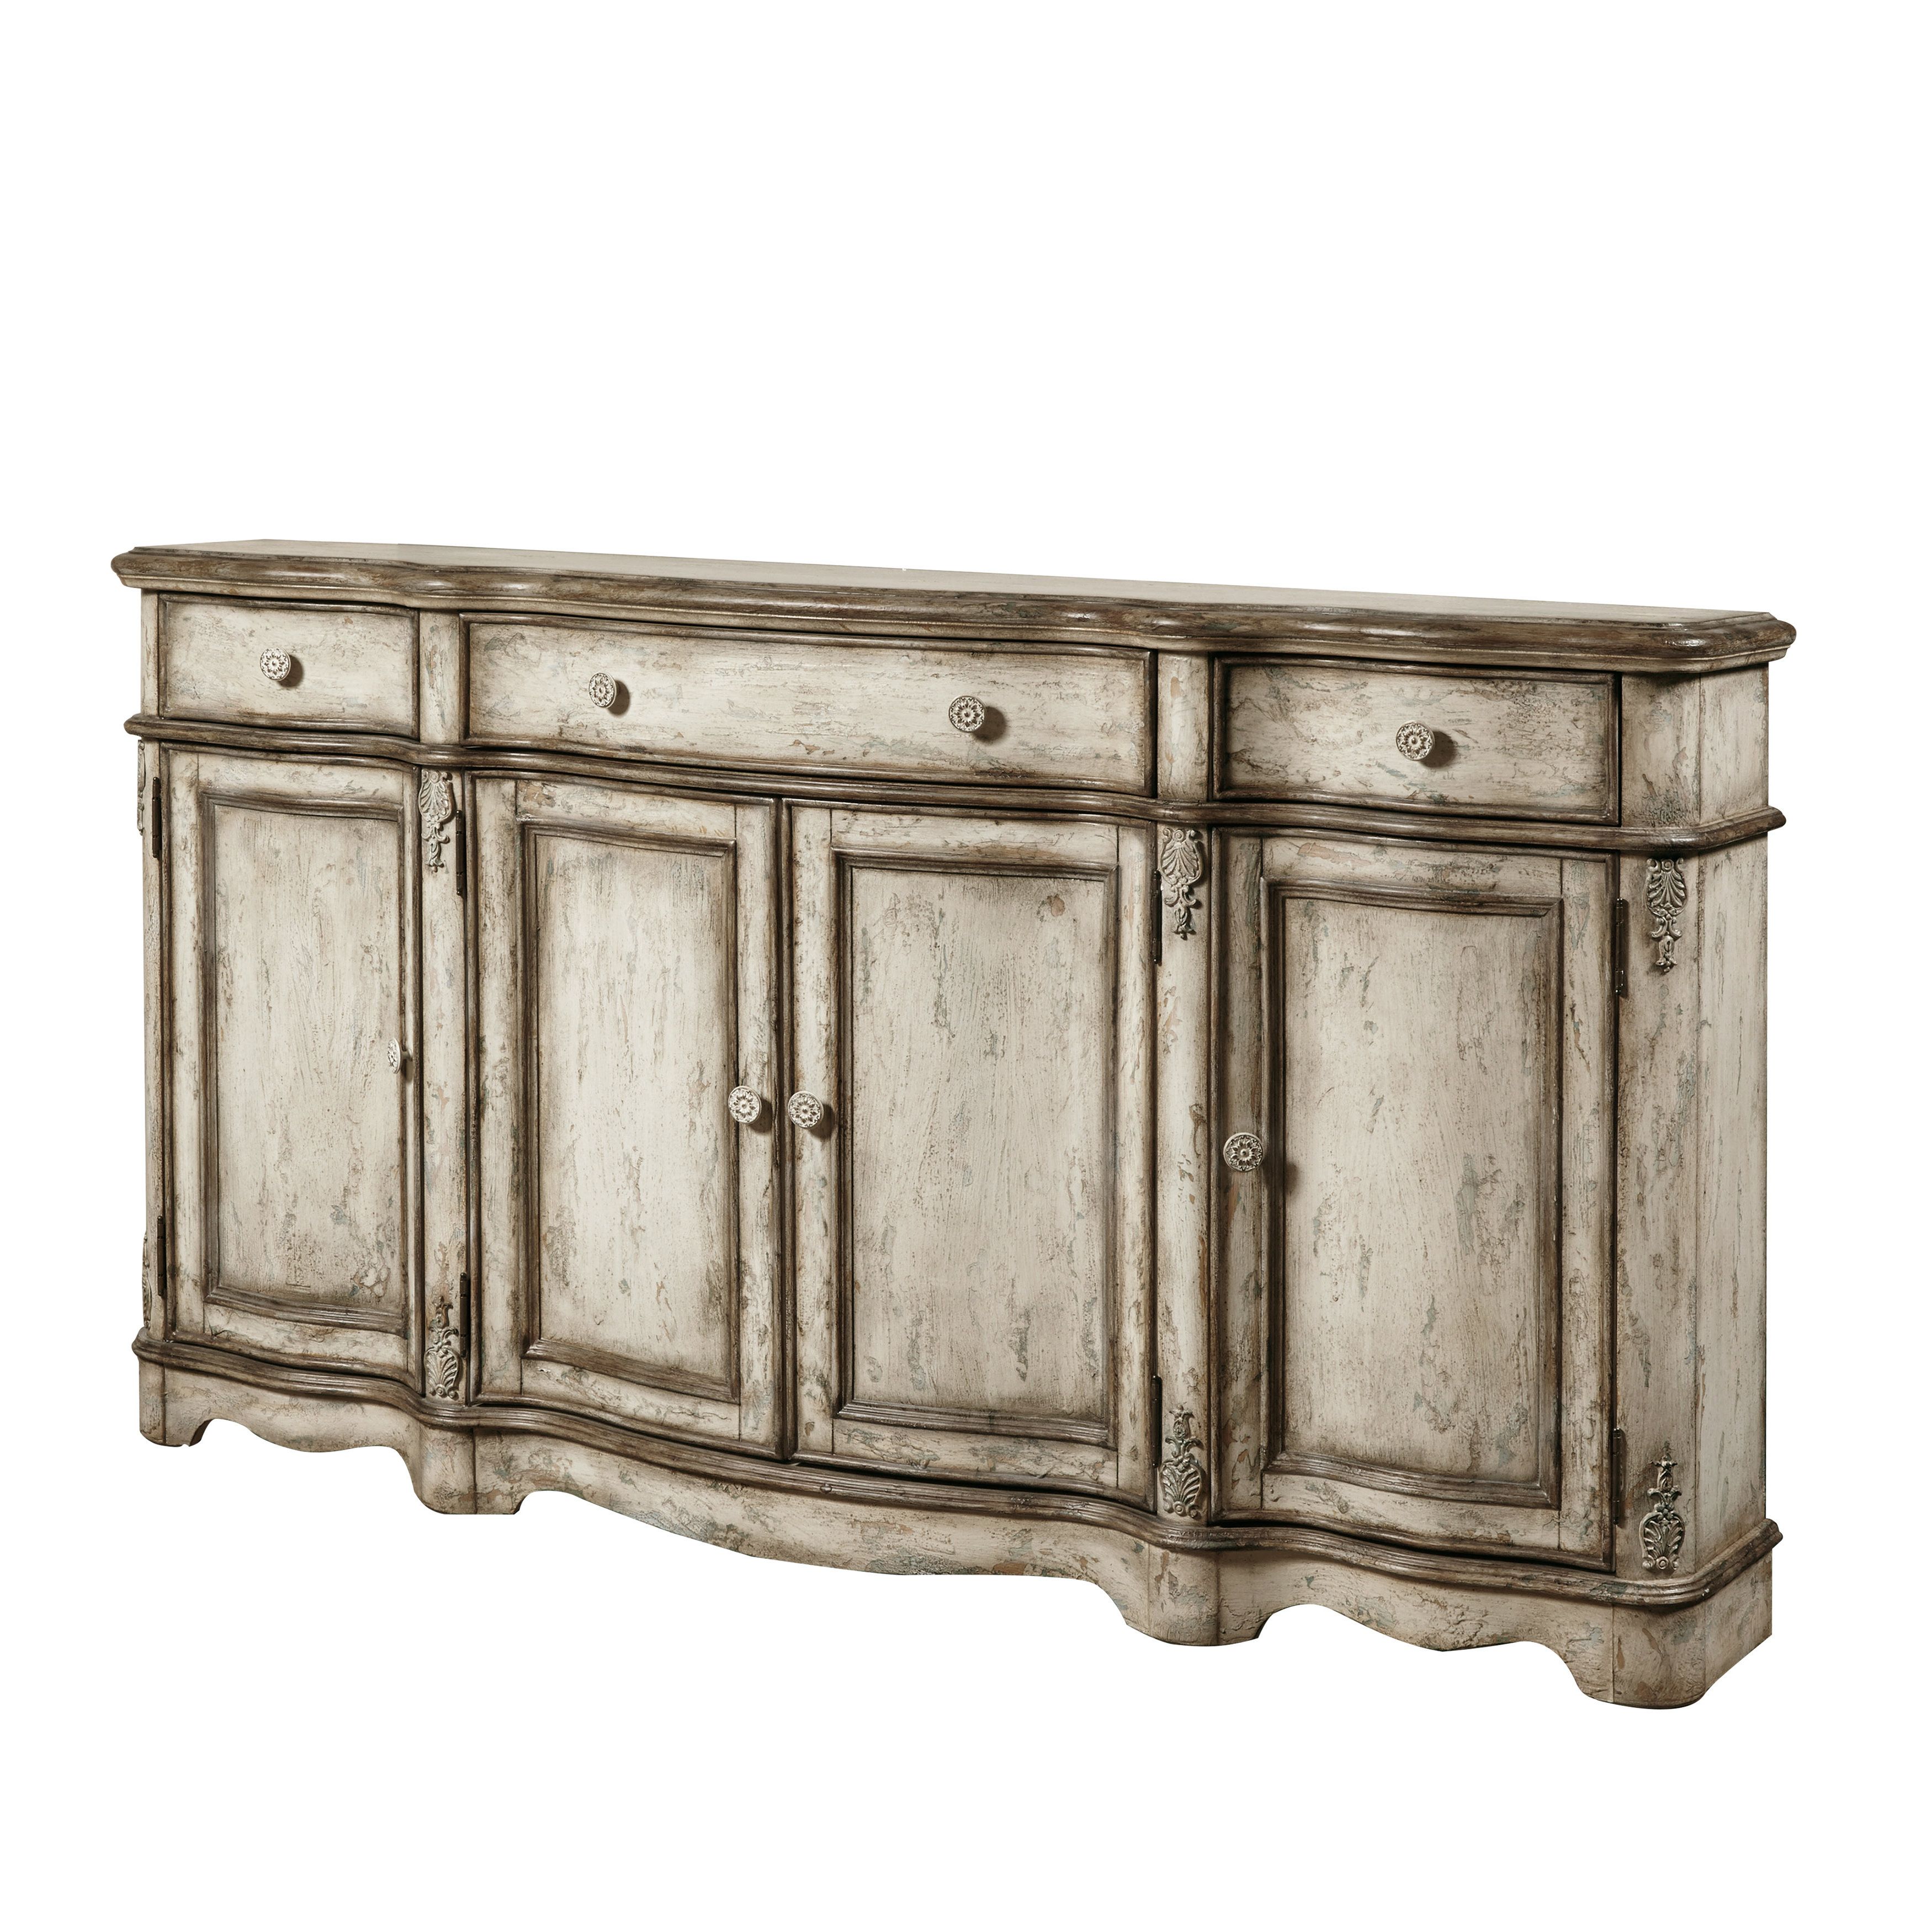 Farmhouse & Rustic Distressed Finish Sideboards & Buffets Intended For Raunds Sideboards (View 3 of 30)